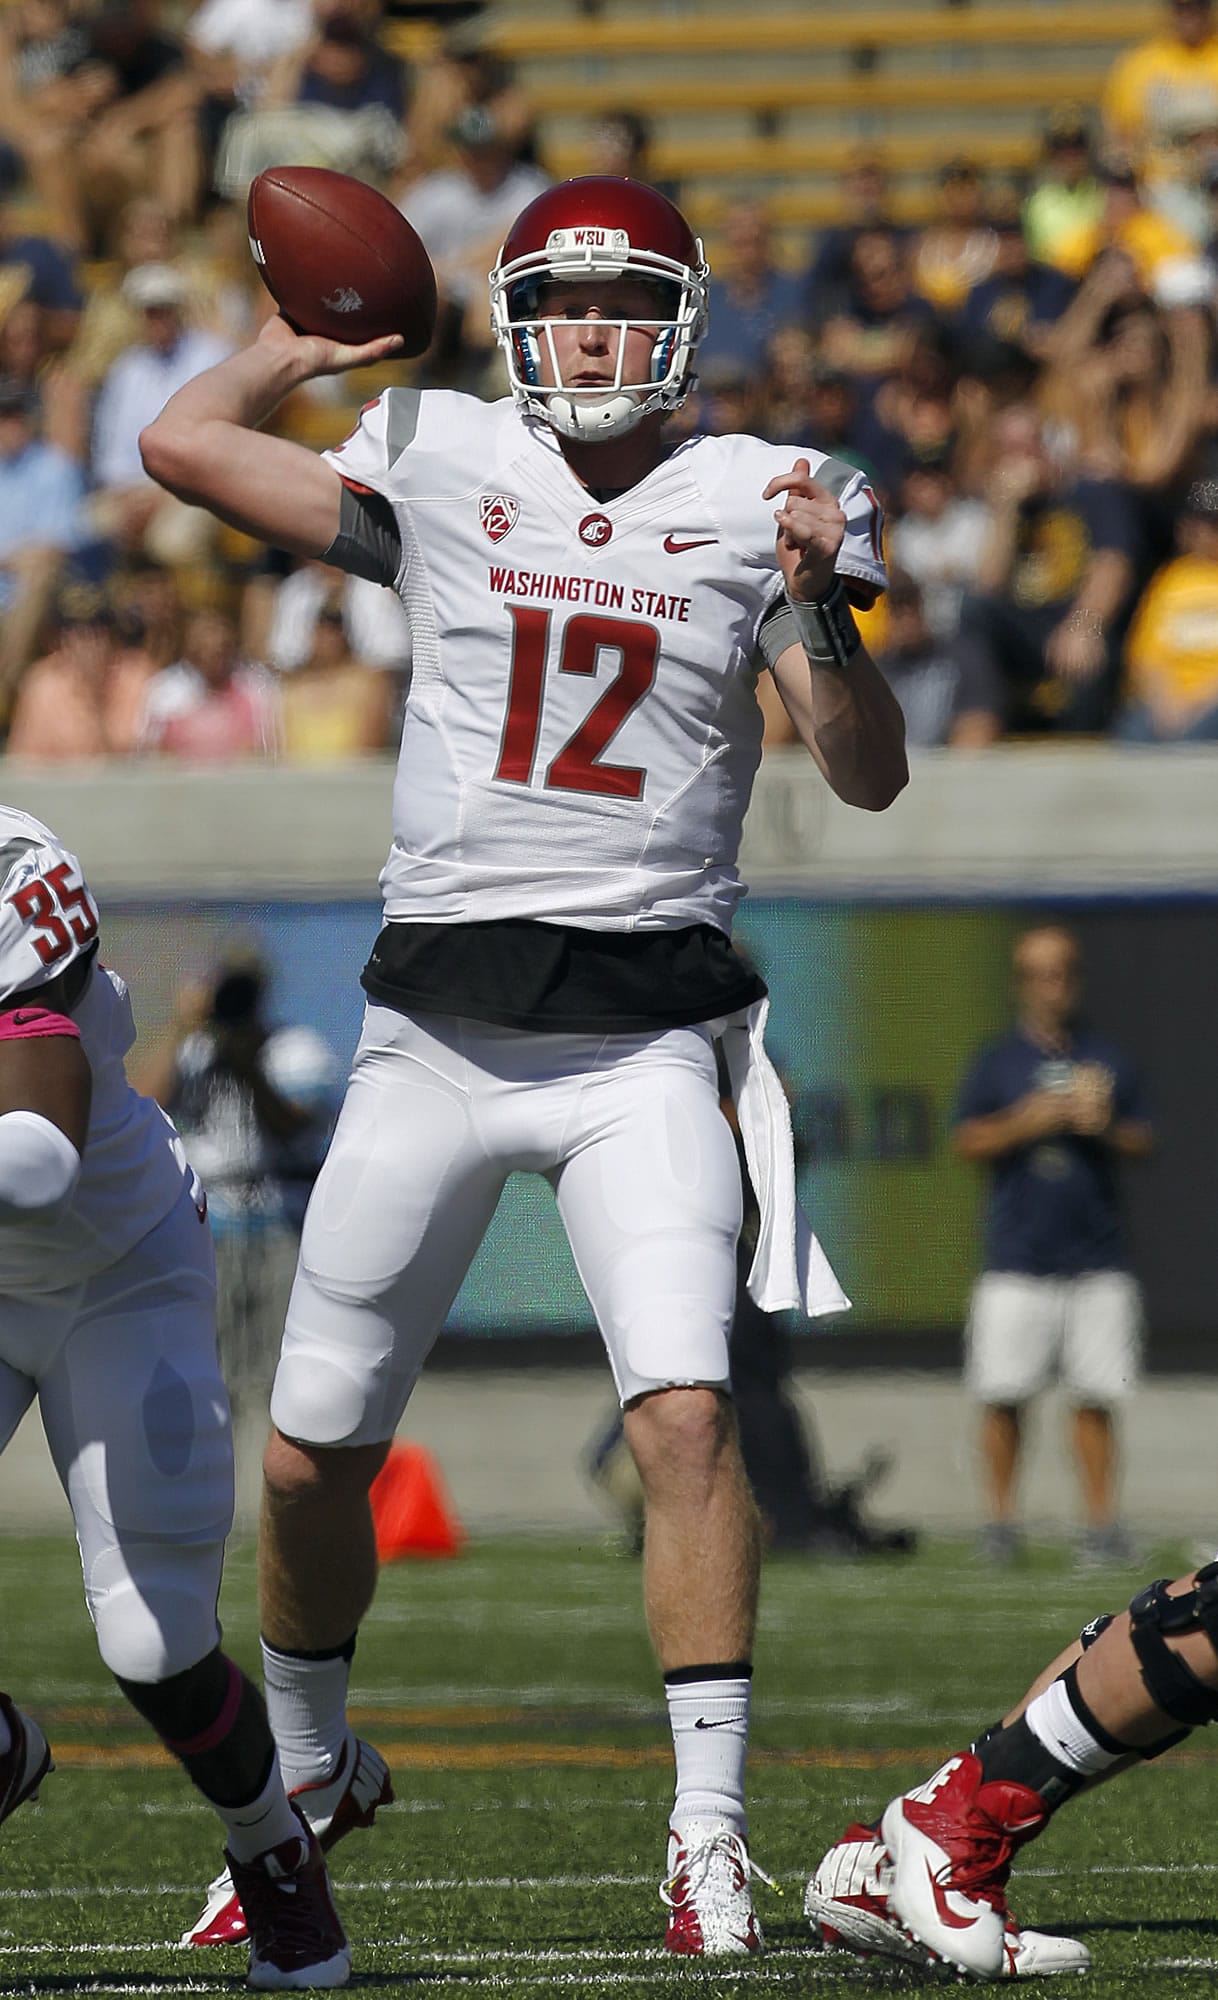 Washington State quarterback Connor Halliday (12) threw for 521 yards and three touchdowns in the Cougars' 44-22 win at California on Saturday.